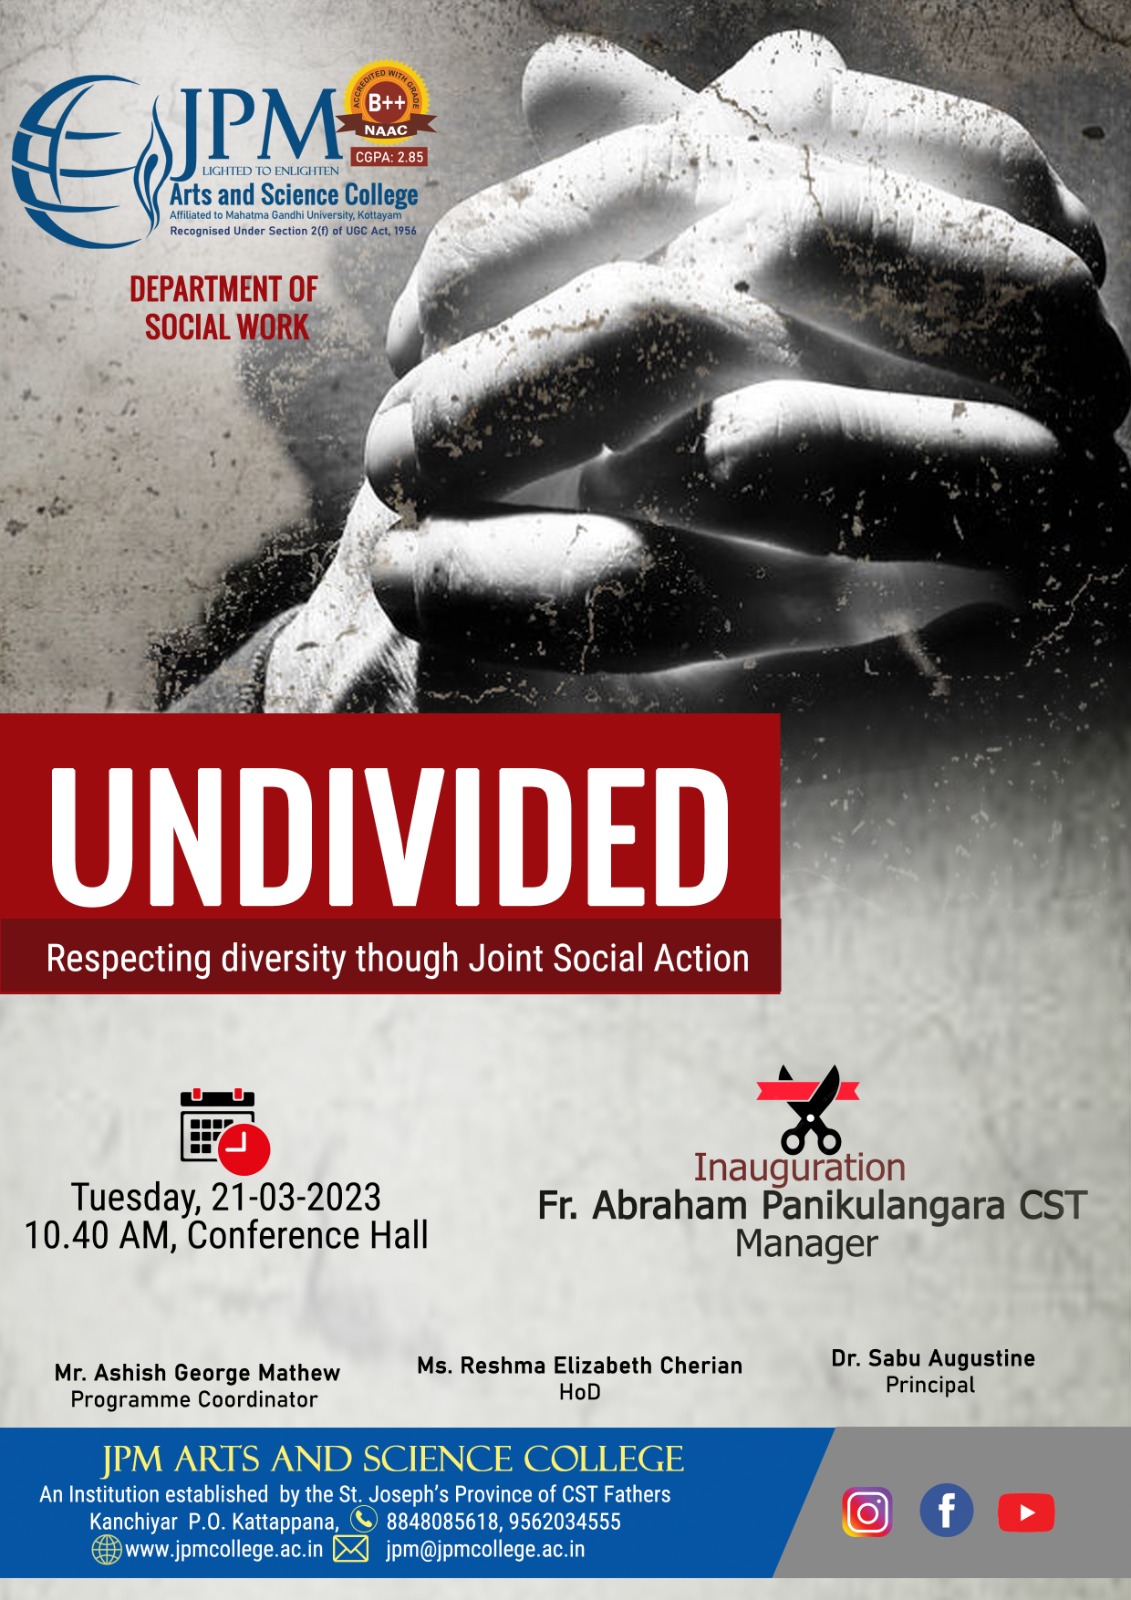 UNDIVIDED Respecting diversity through Joint Social Action